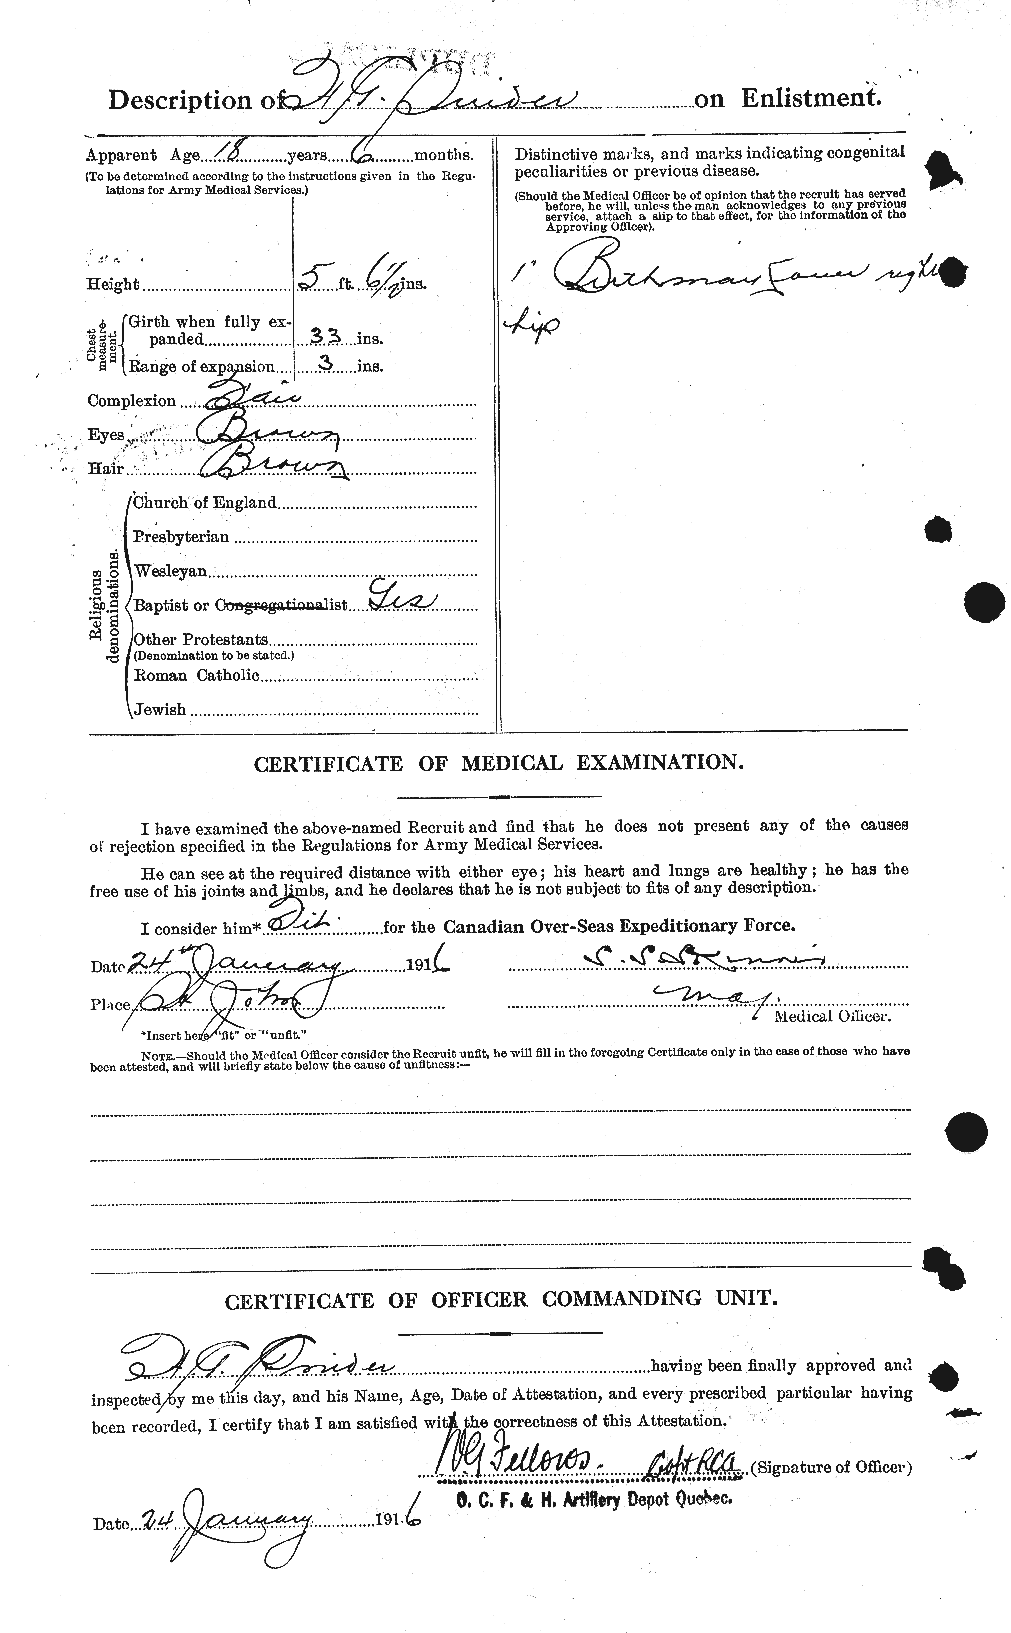 Personnel Records of the First World War - CEF 110027b